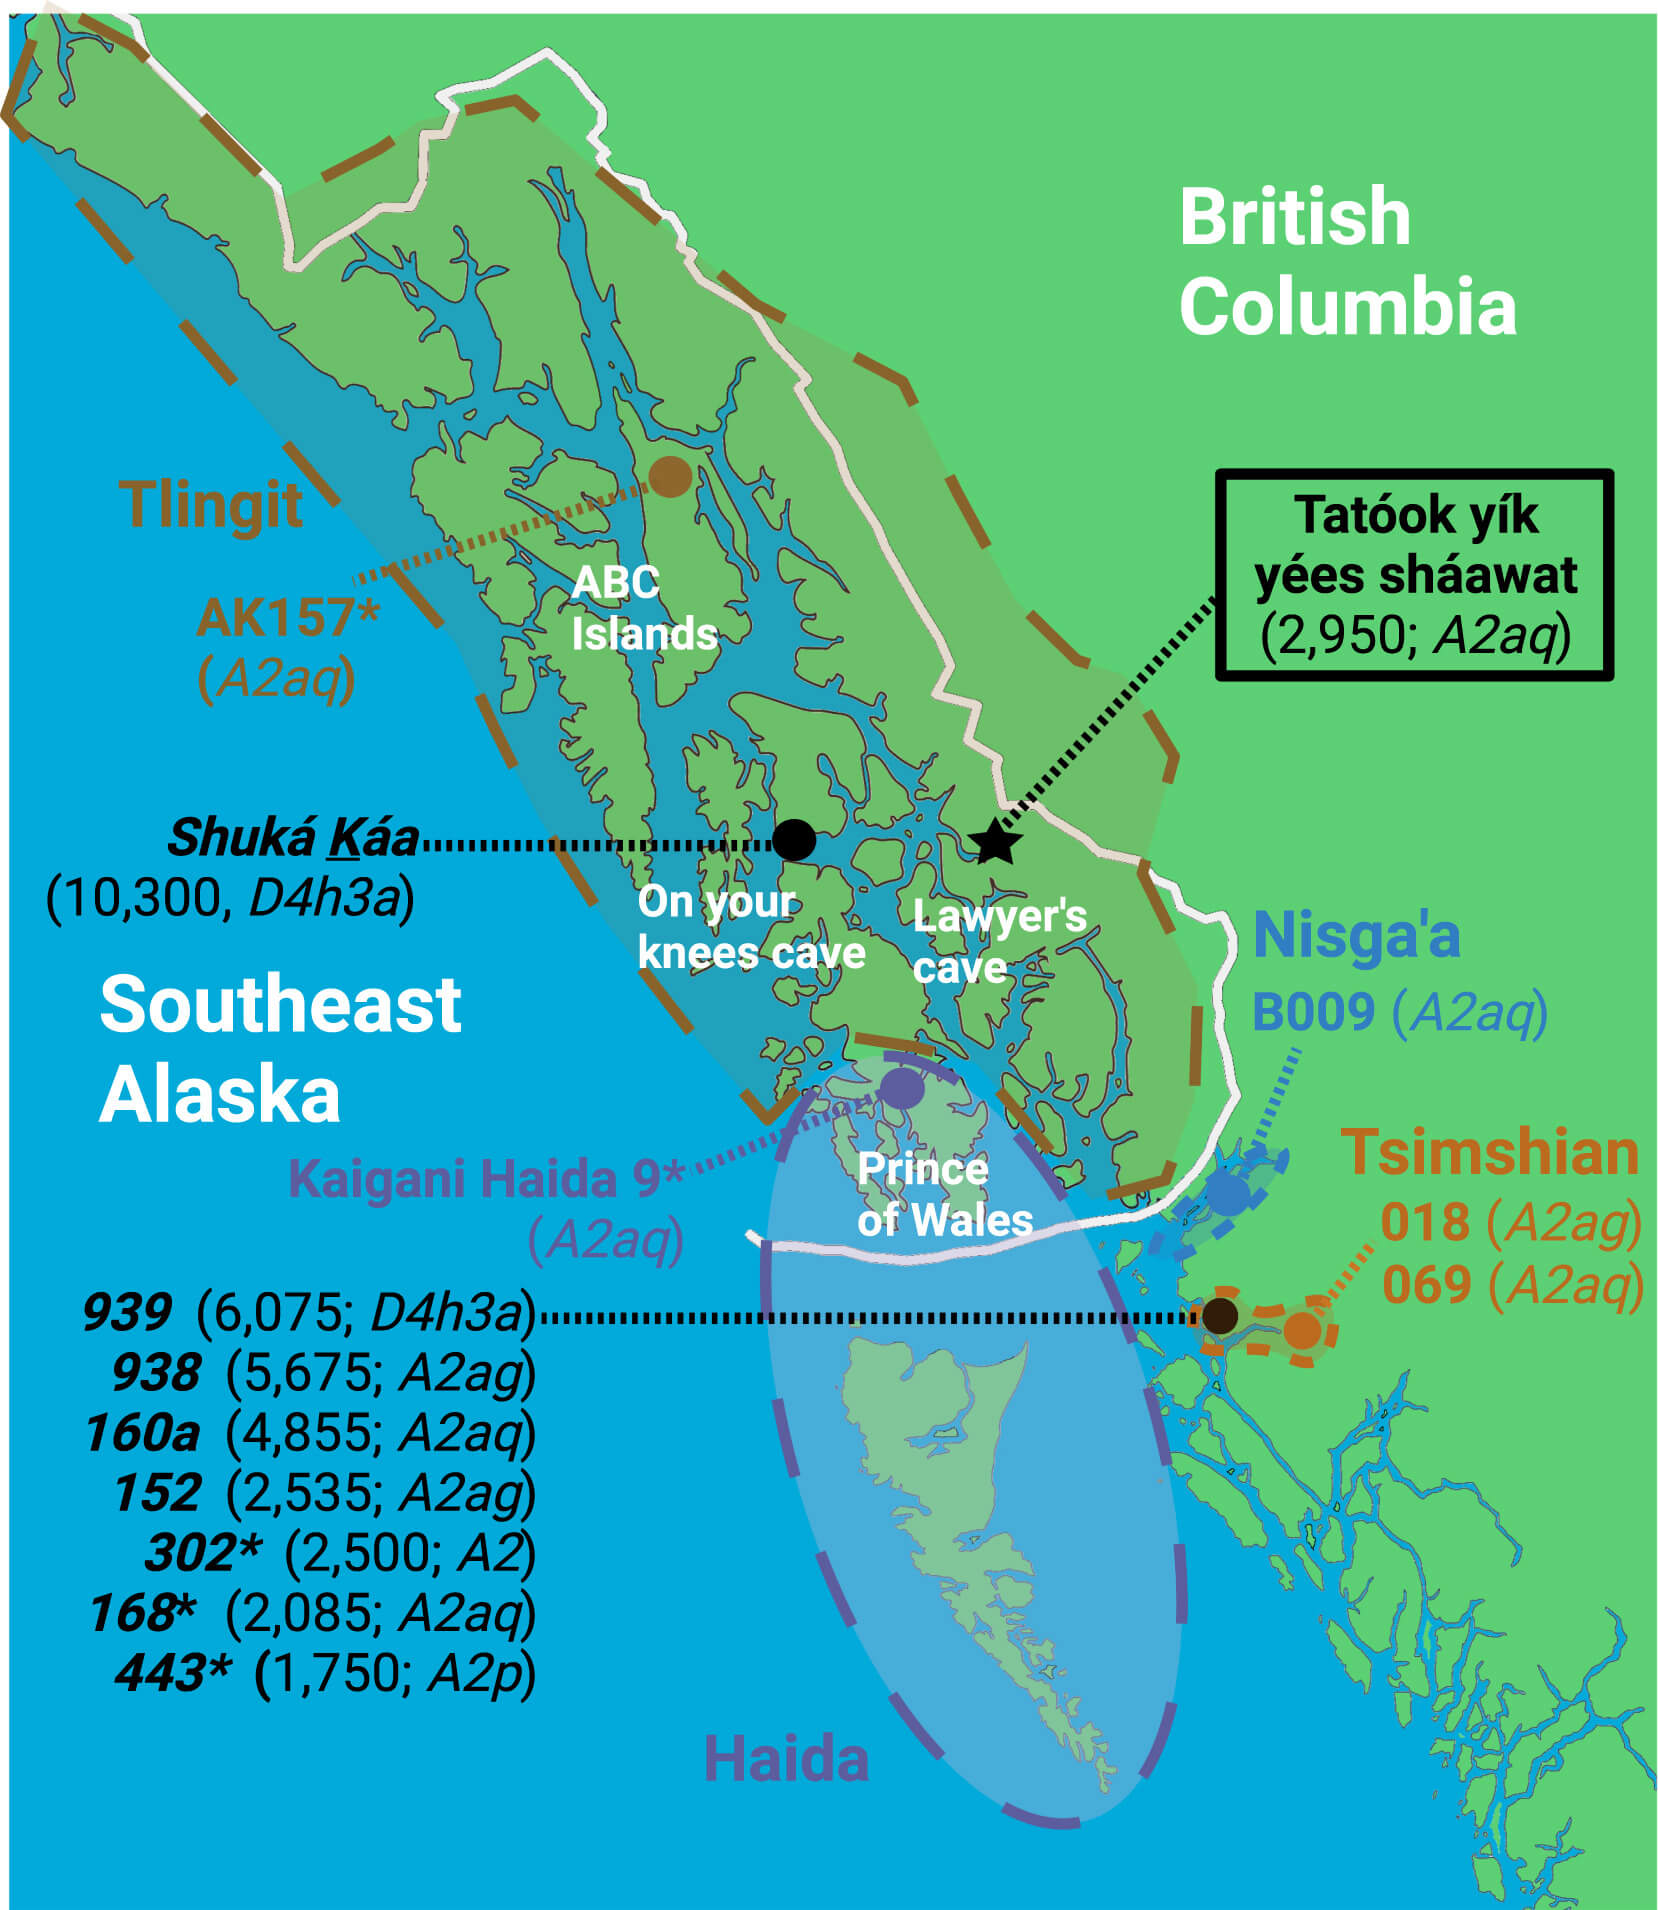 Map of Northern Pacific Northwest Coast and location of ancient and modern individuals